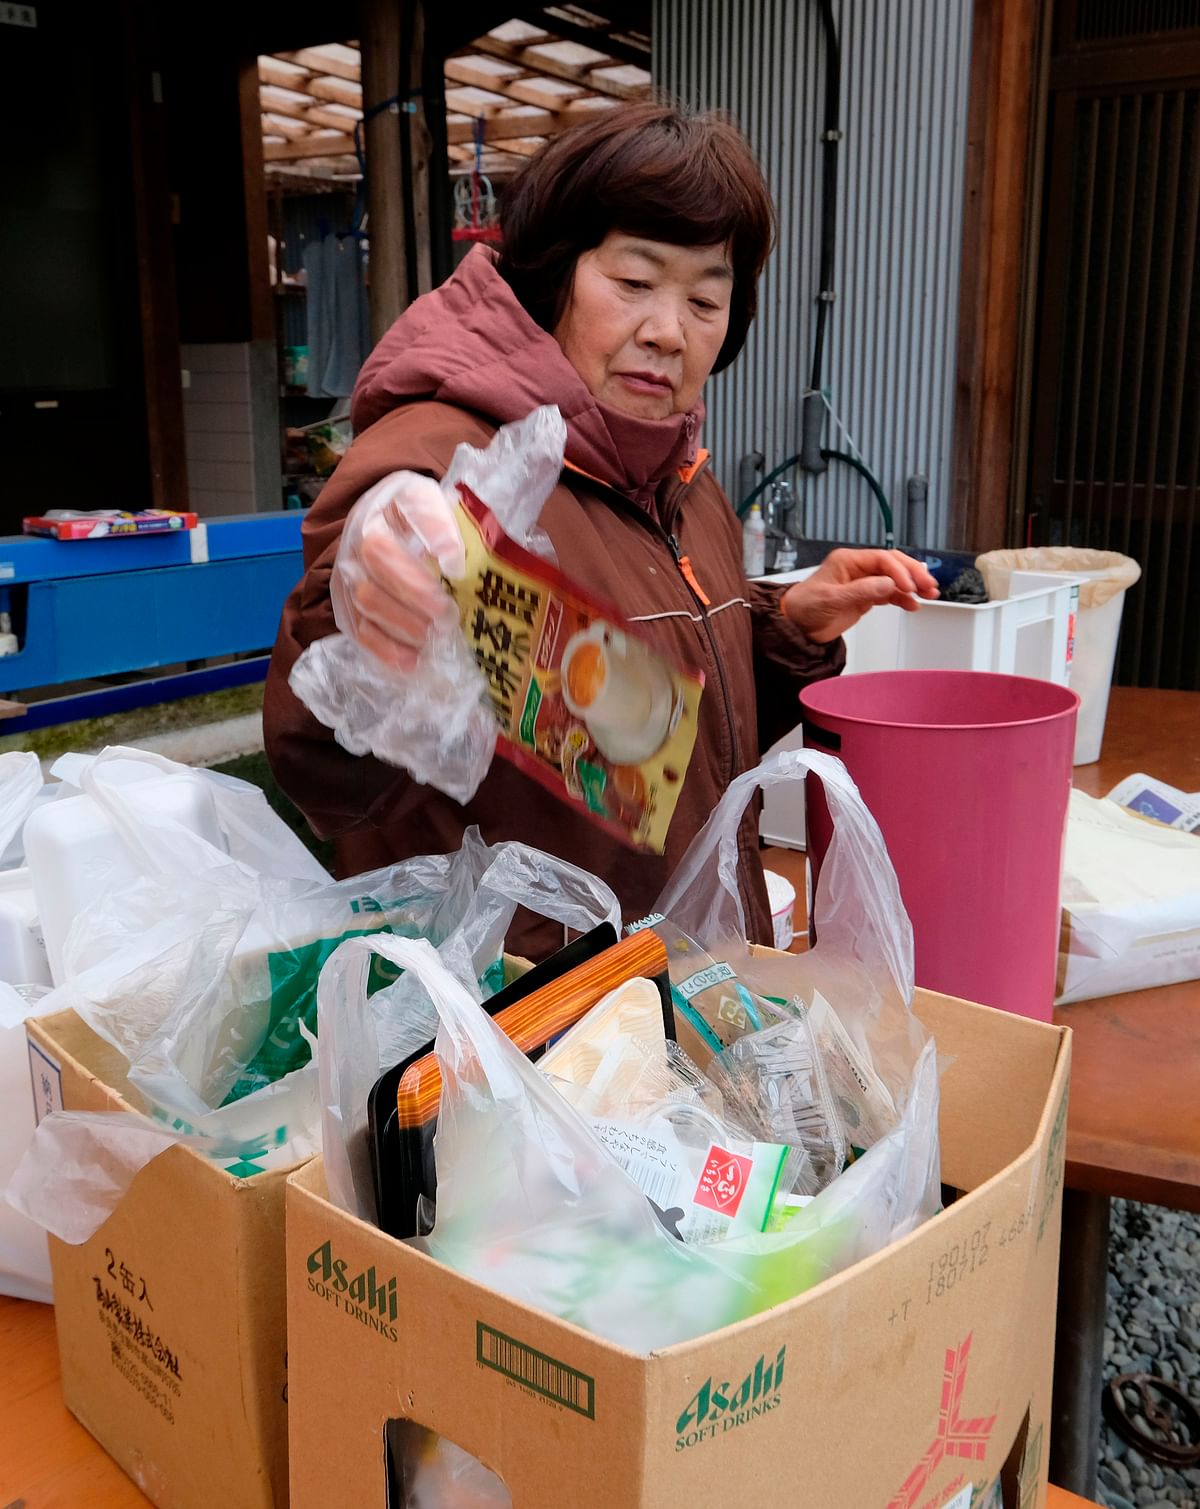 This picture taken on 14 March 2019 shows Japanese resident Saeko Takahashi separating trash into different boxes at her home kitchen in the town of Kamikatsu, Tokushima prefecture. Photo: AFP